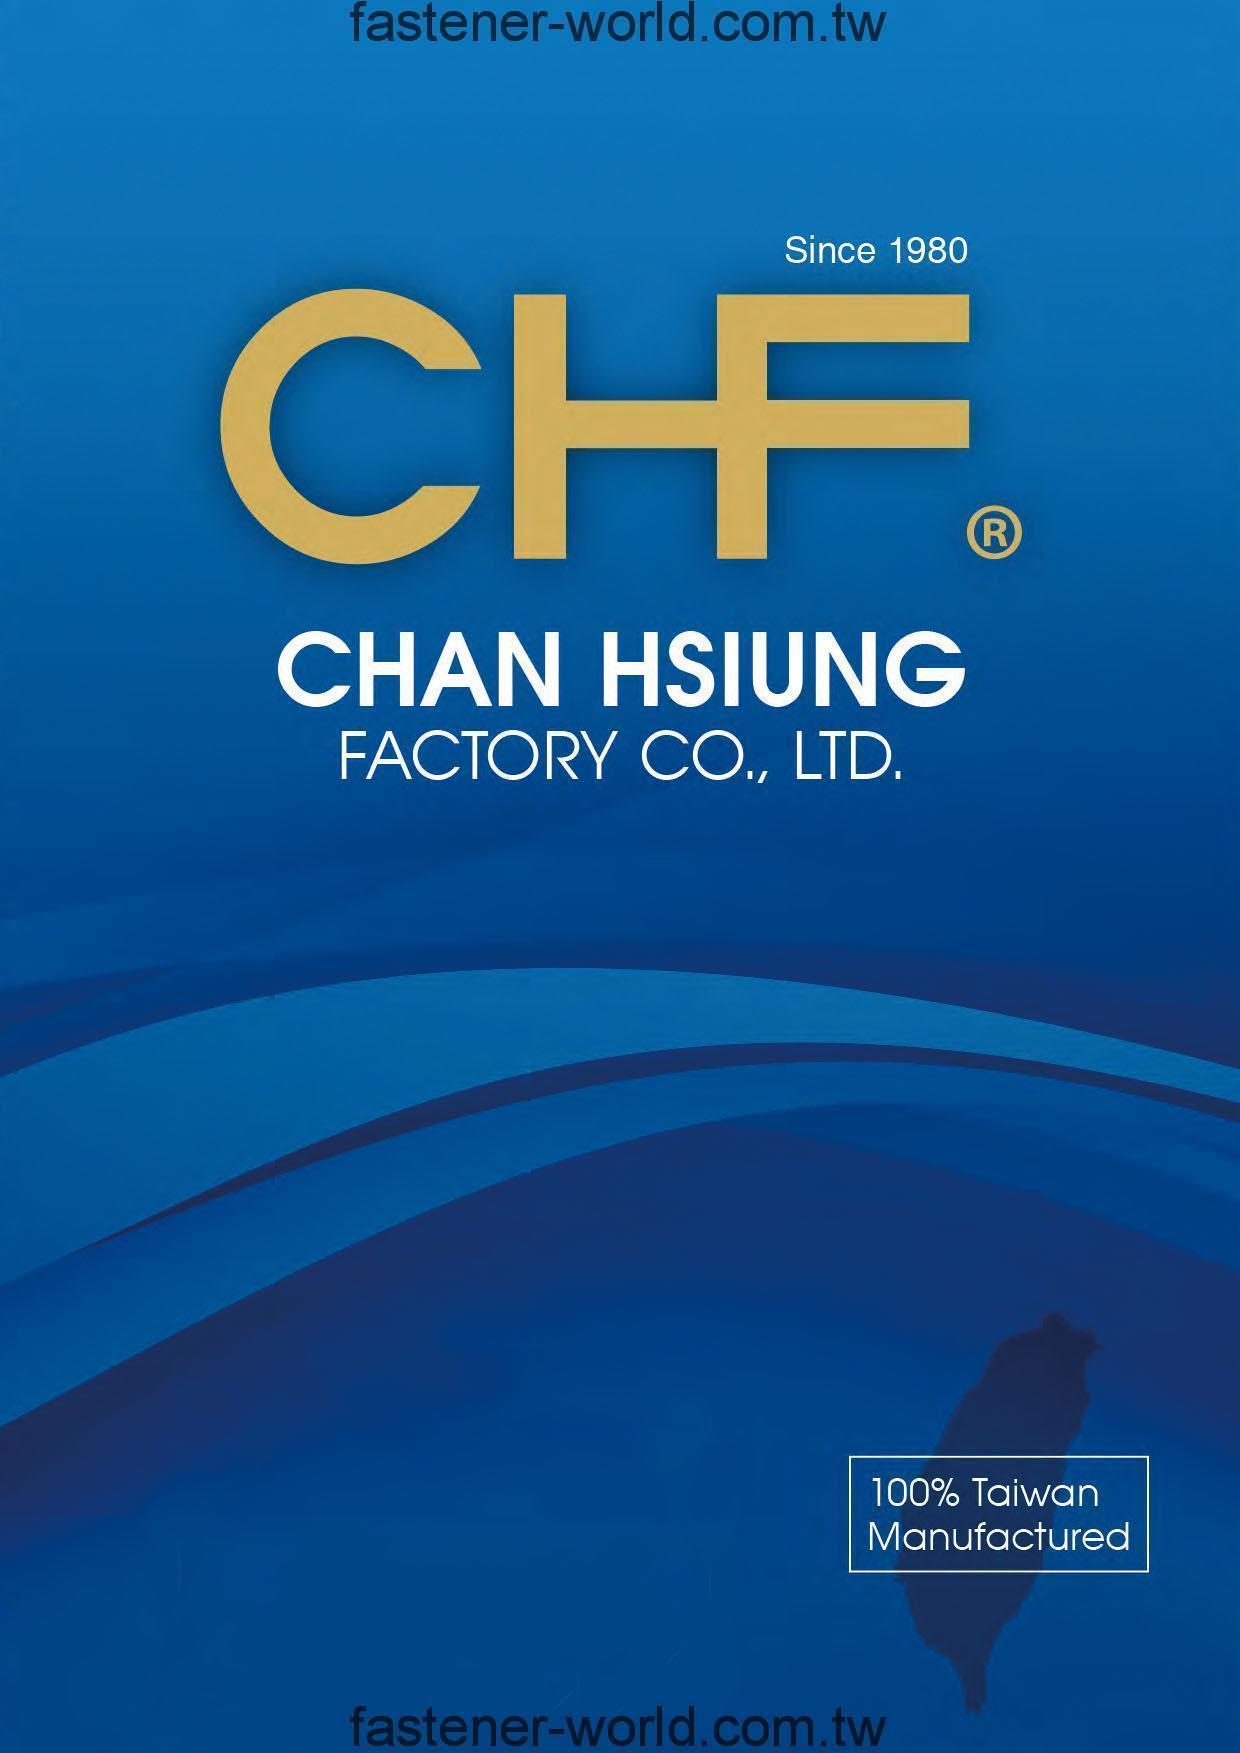 CHAN HSIUNG FACTORY CO., LTD. _Online Catalogues